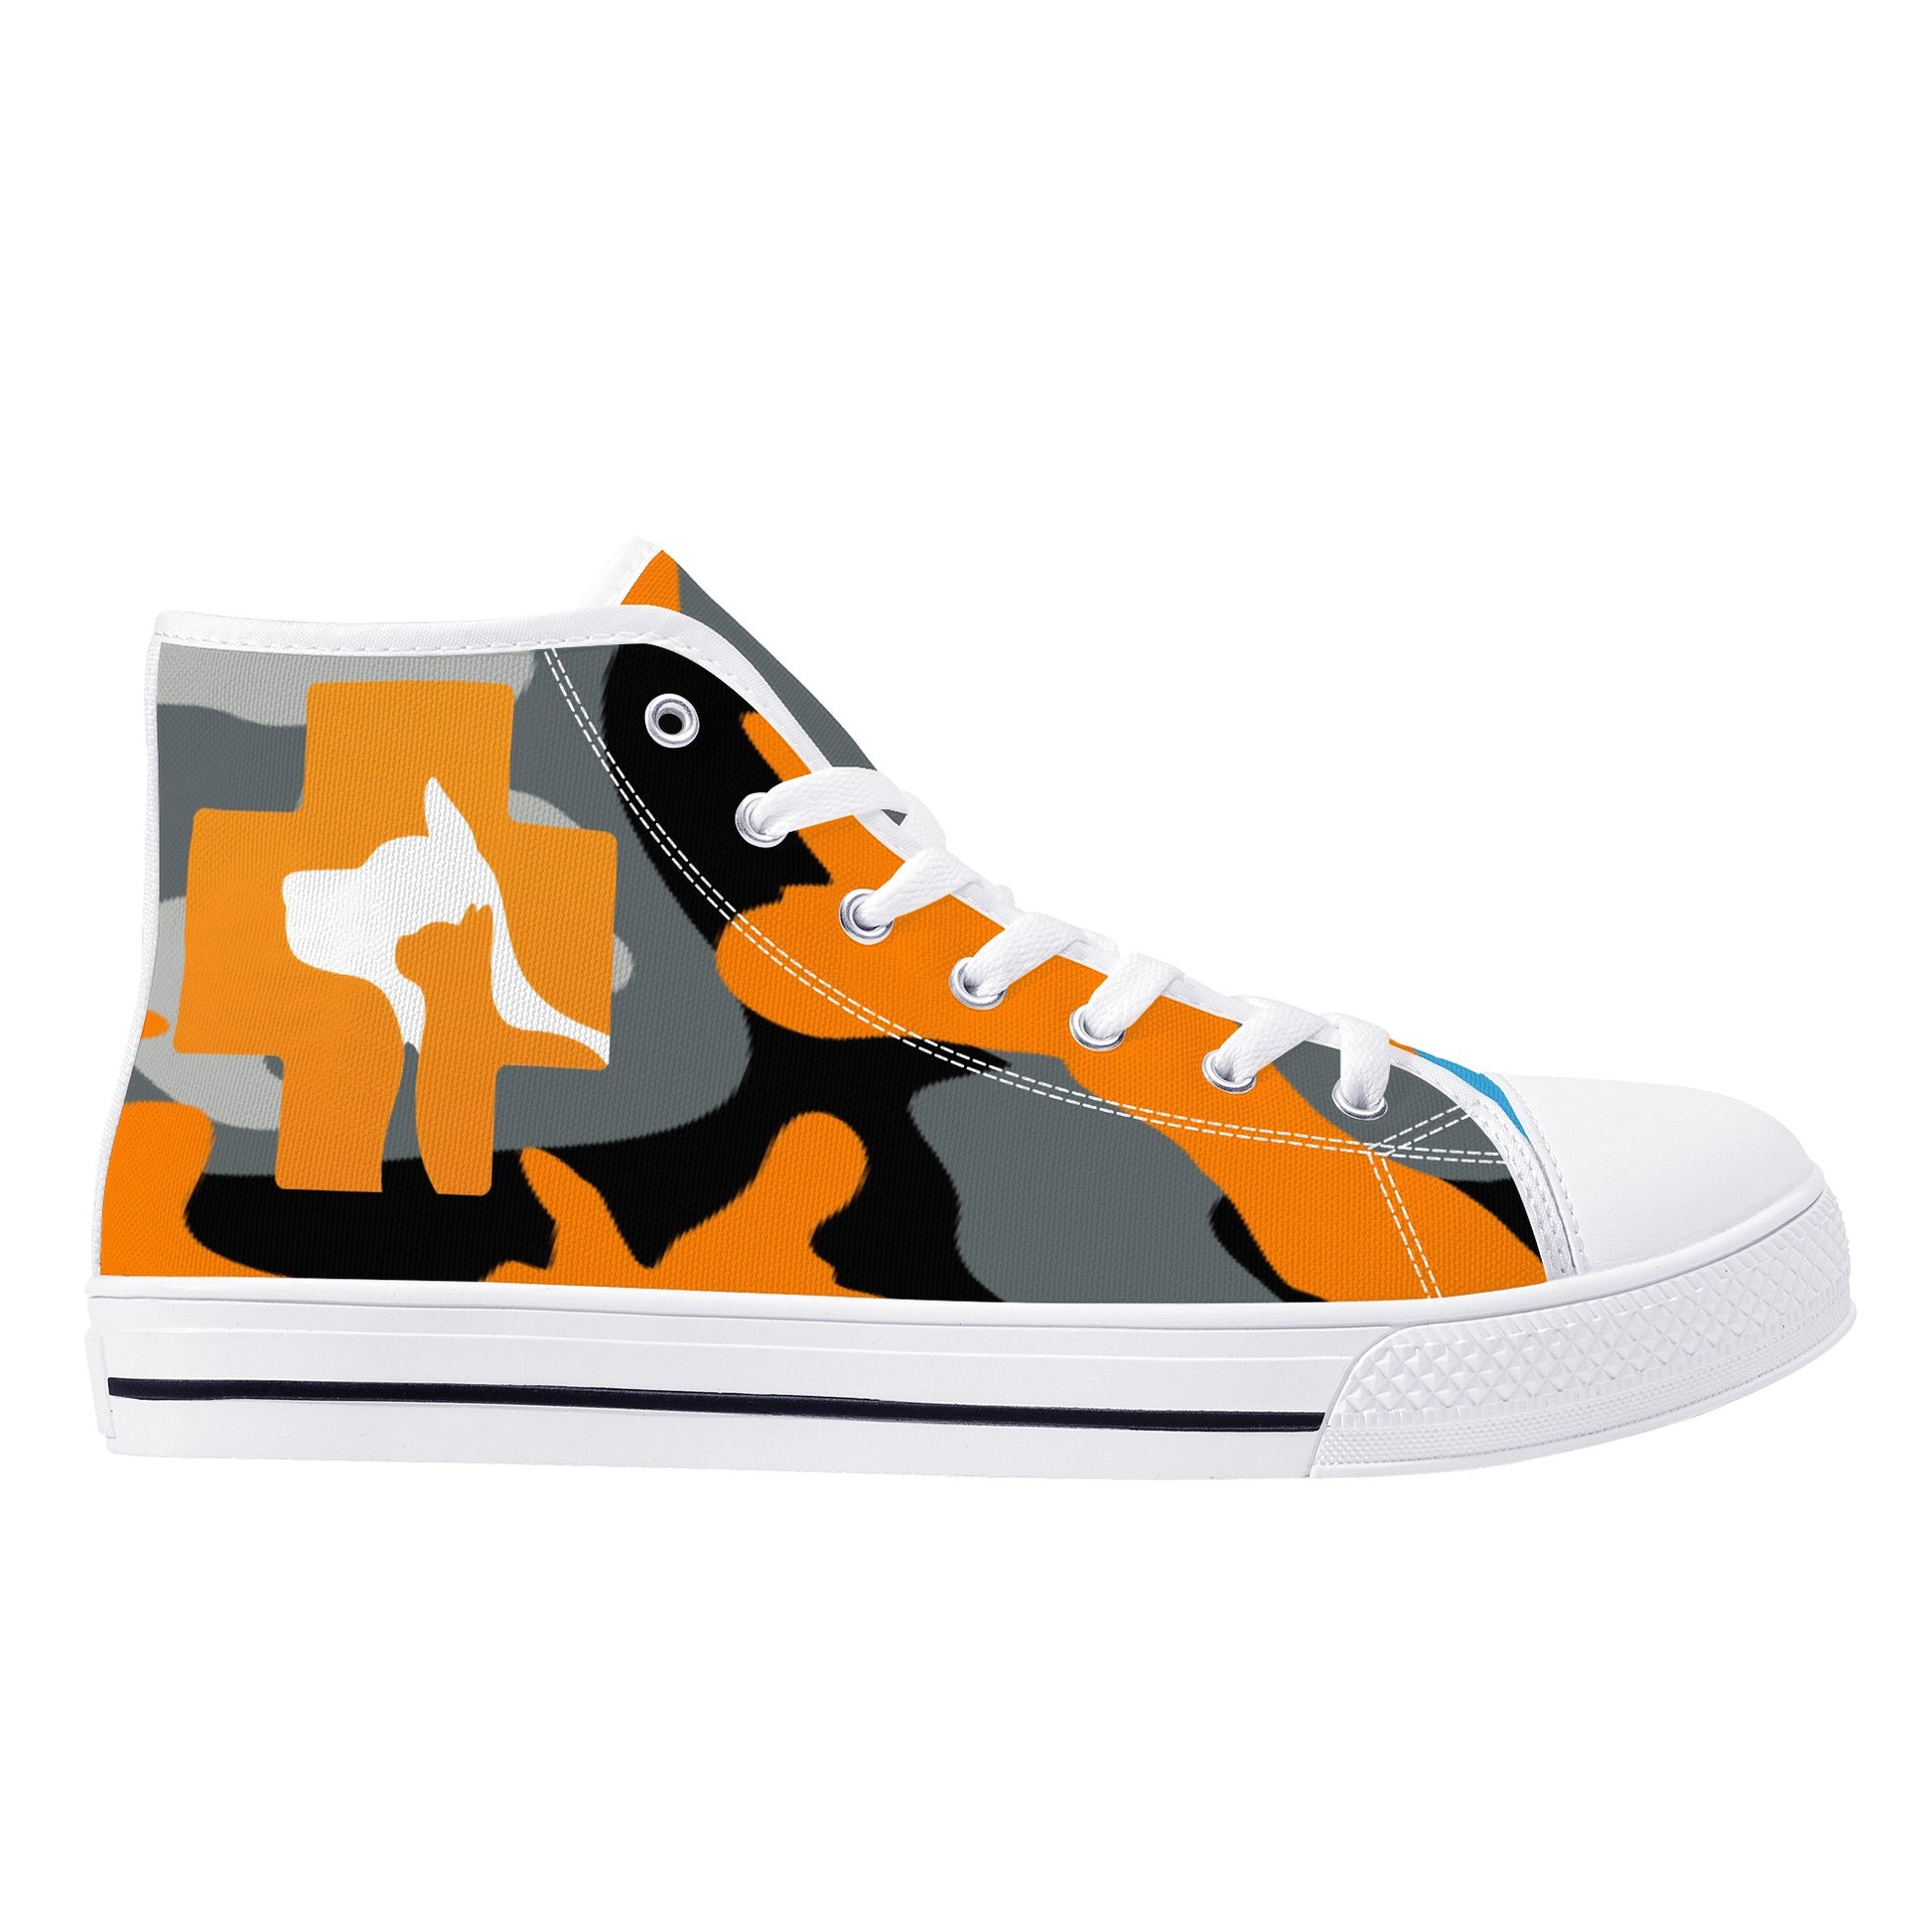 Stand out  with the  Nugget Army Vets Womens High Top Canvas Shoes  available at Hey Nugget. Grab yours today!